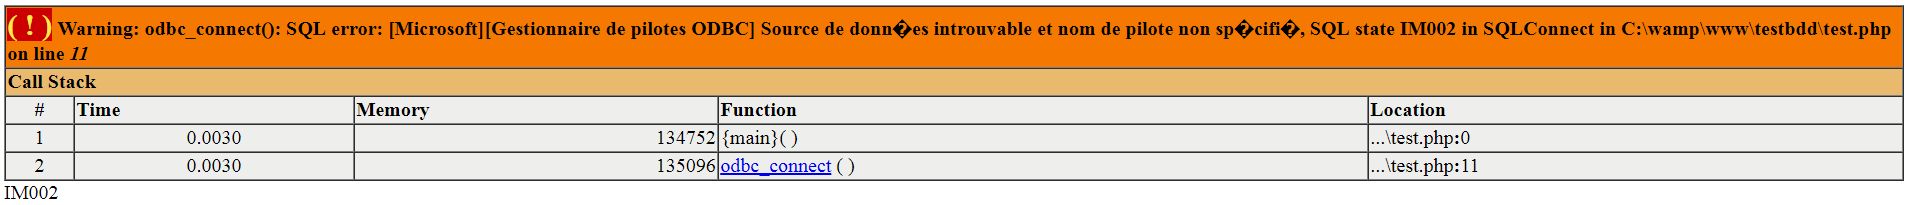 Nom : error odcb.PNG
Affichages : 114
Taille : 22,6 Ko